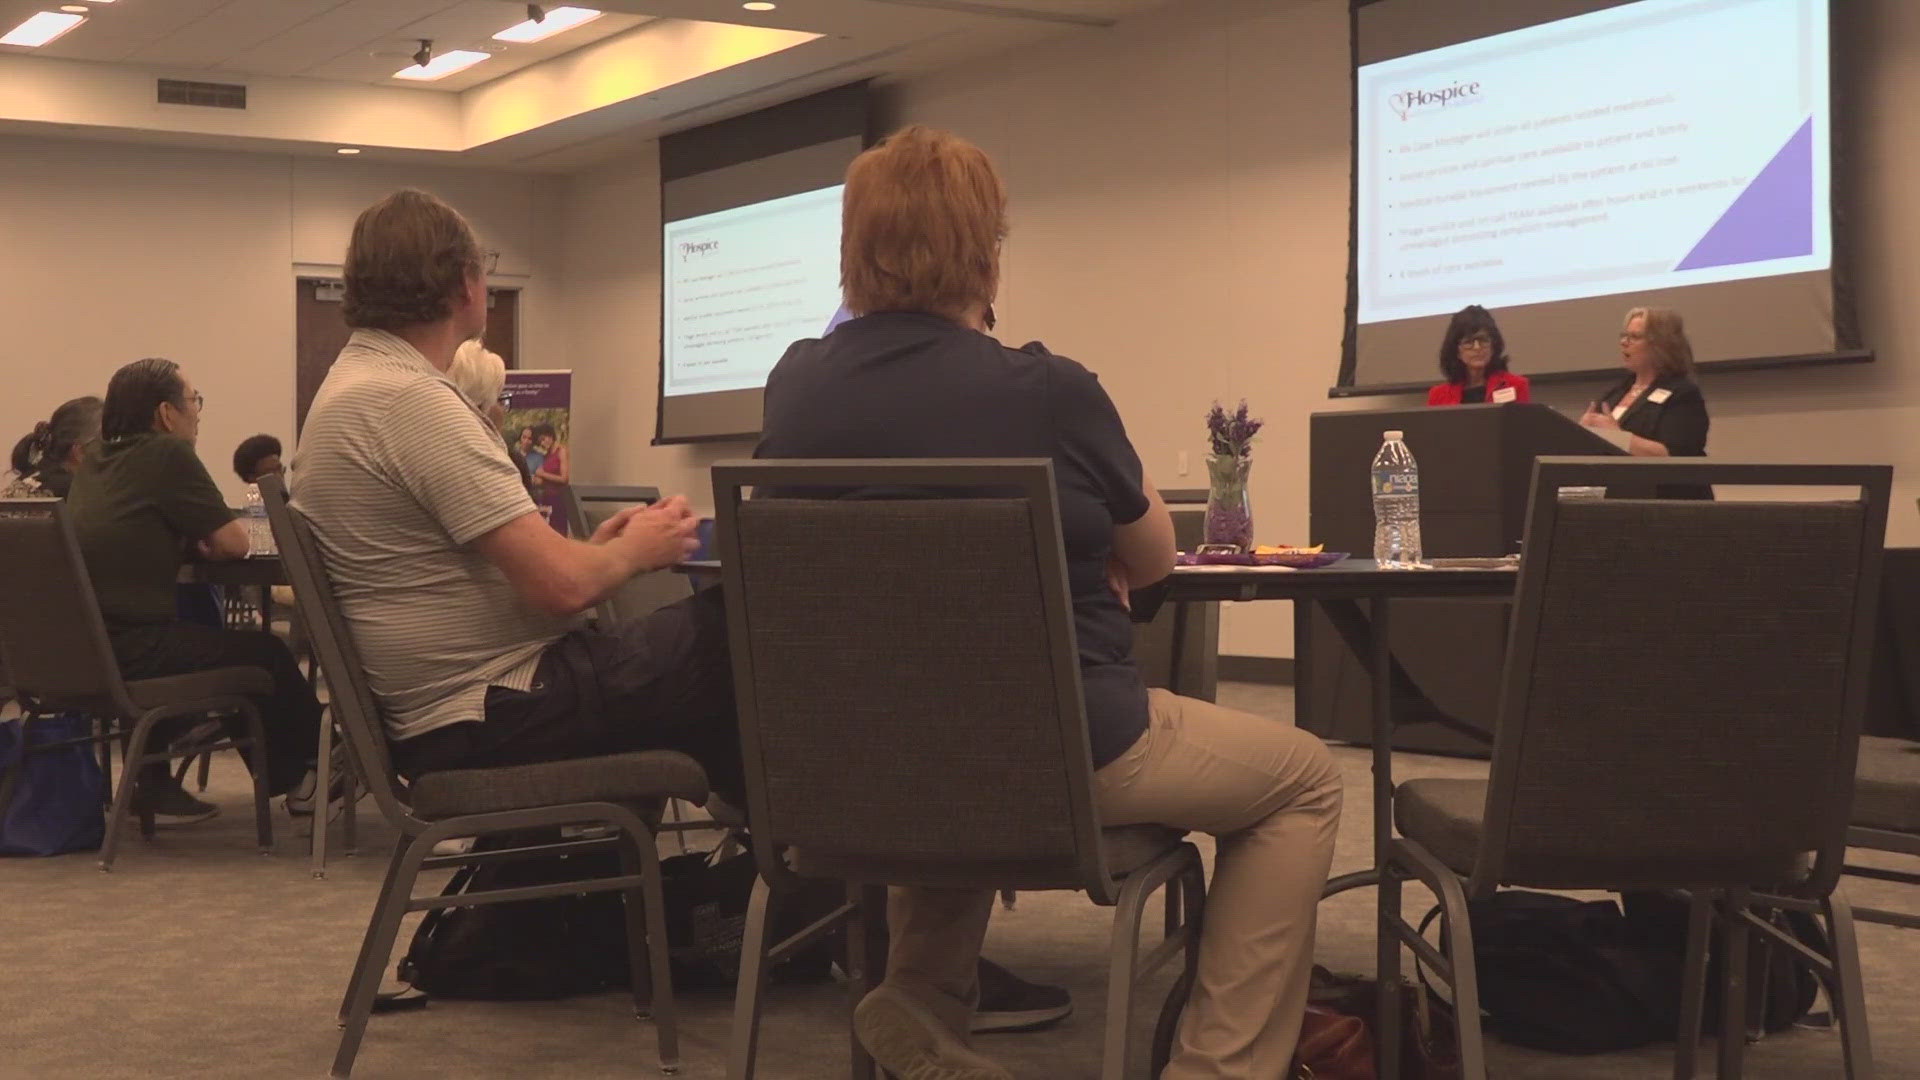 Alzheimer's Association West Texas Chapter aims to educate not just healthcare workers, families or caregivers, but also everyday people on Alzheimer's and dementia.